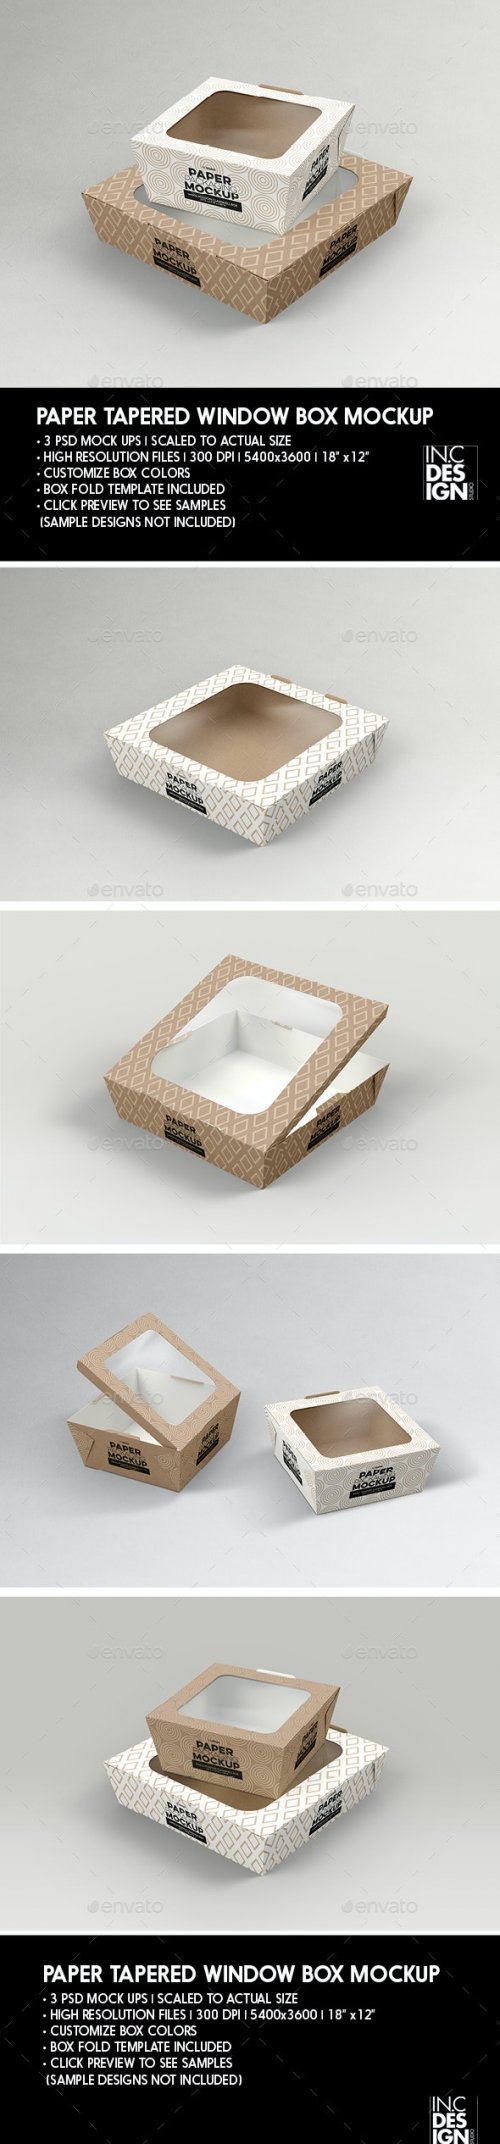 GraphicRiver - Paper Tapered Window Boxes Packaging Mockup - 26665459